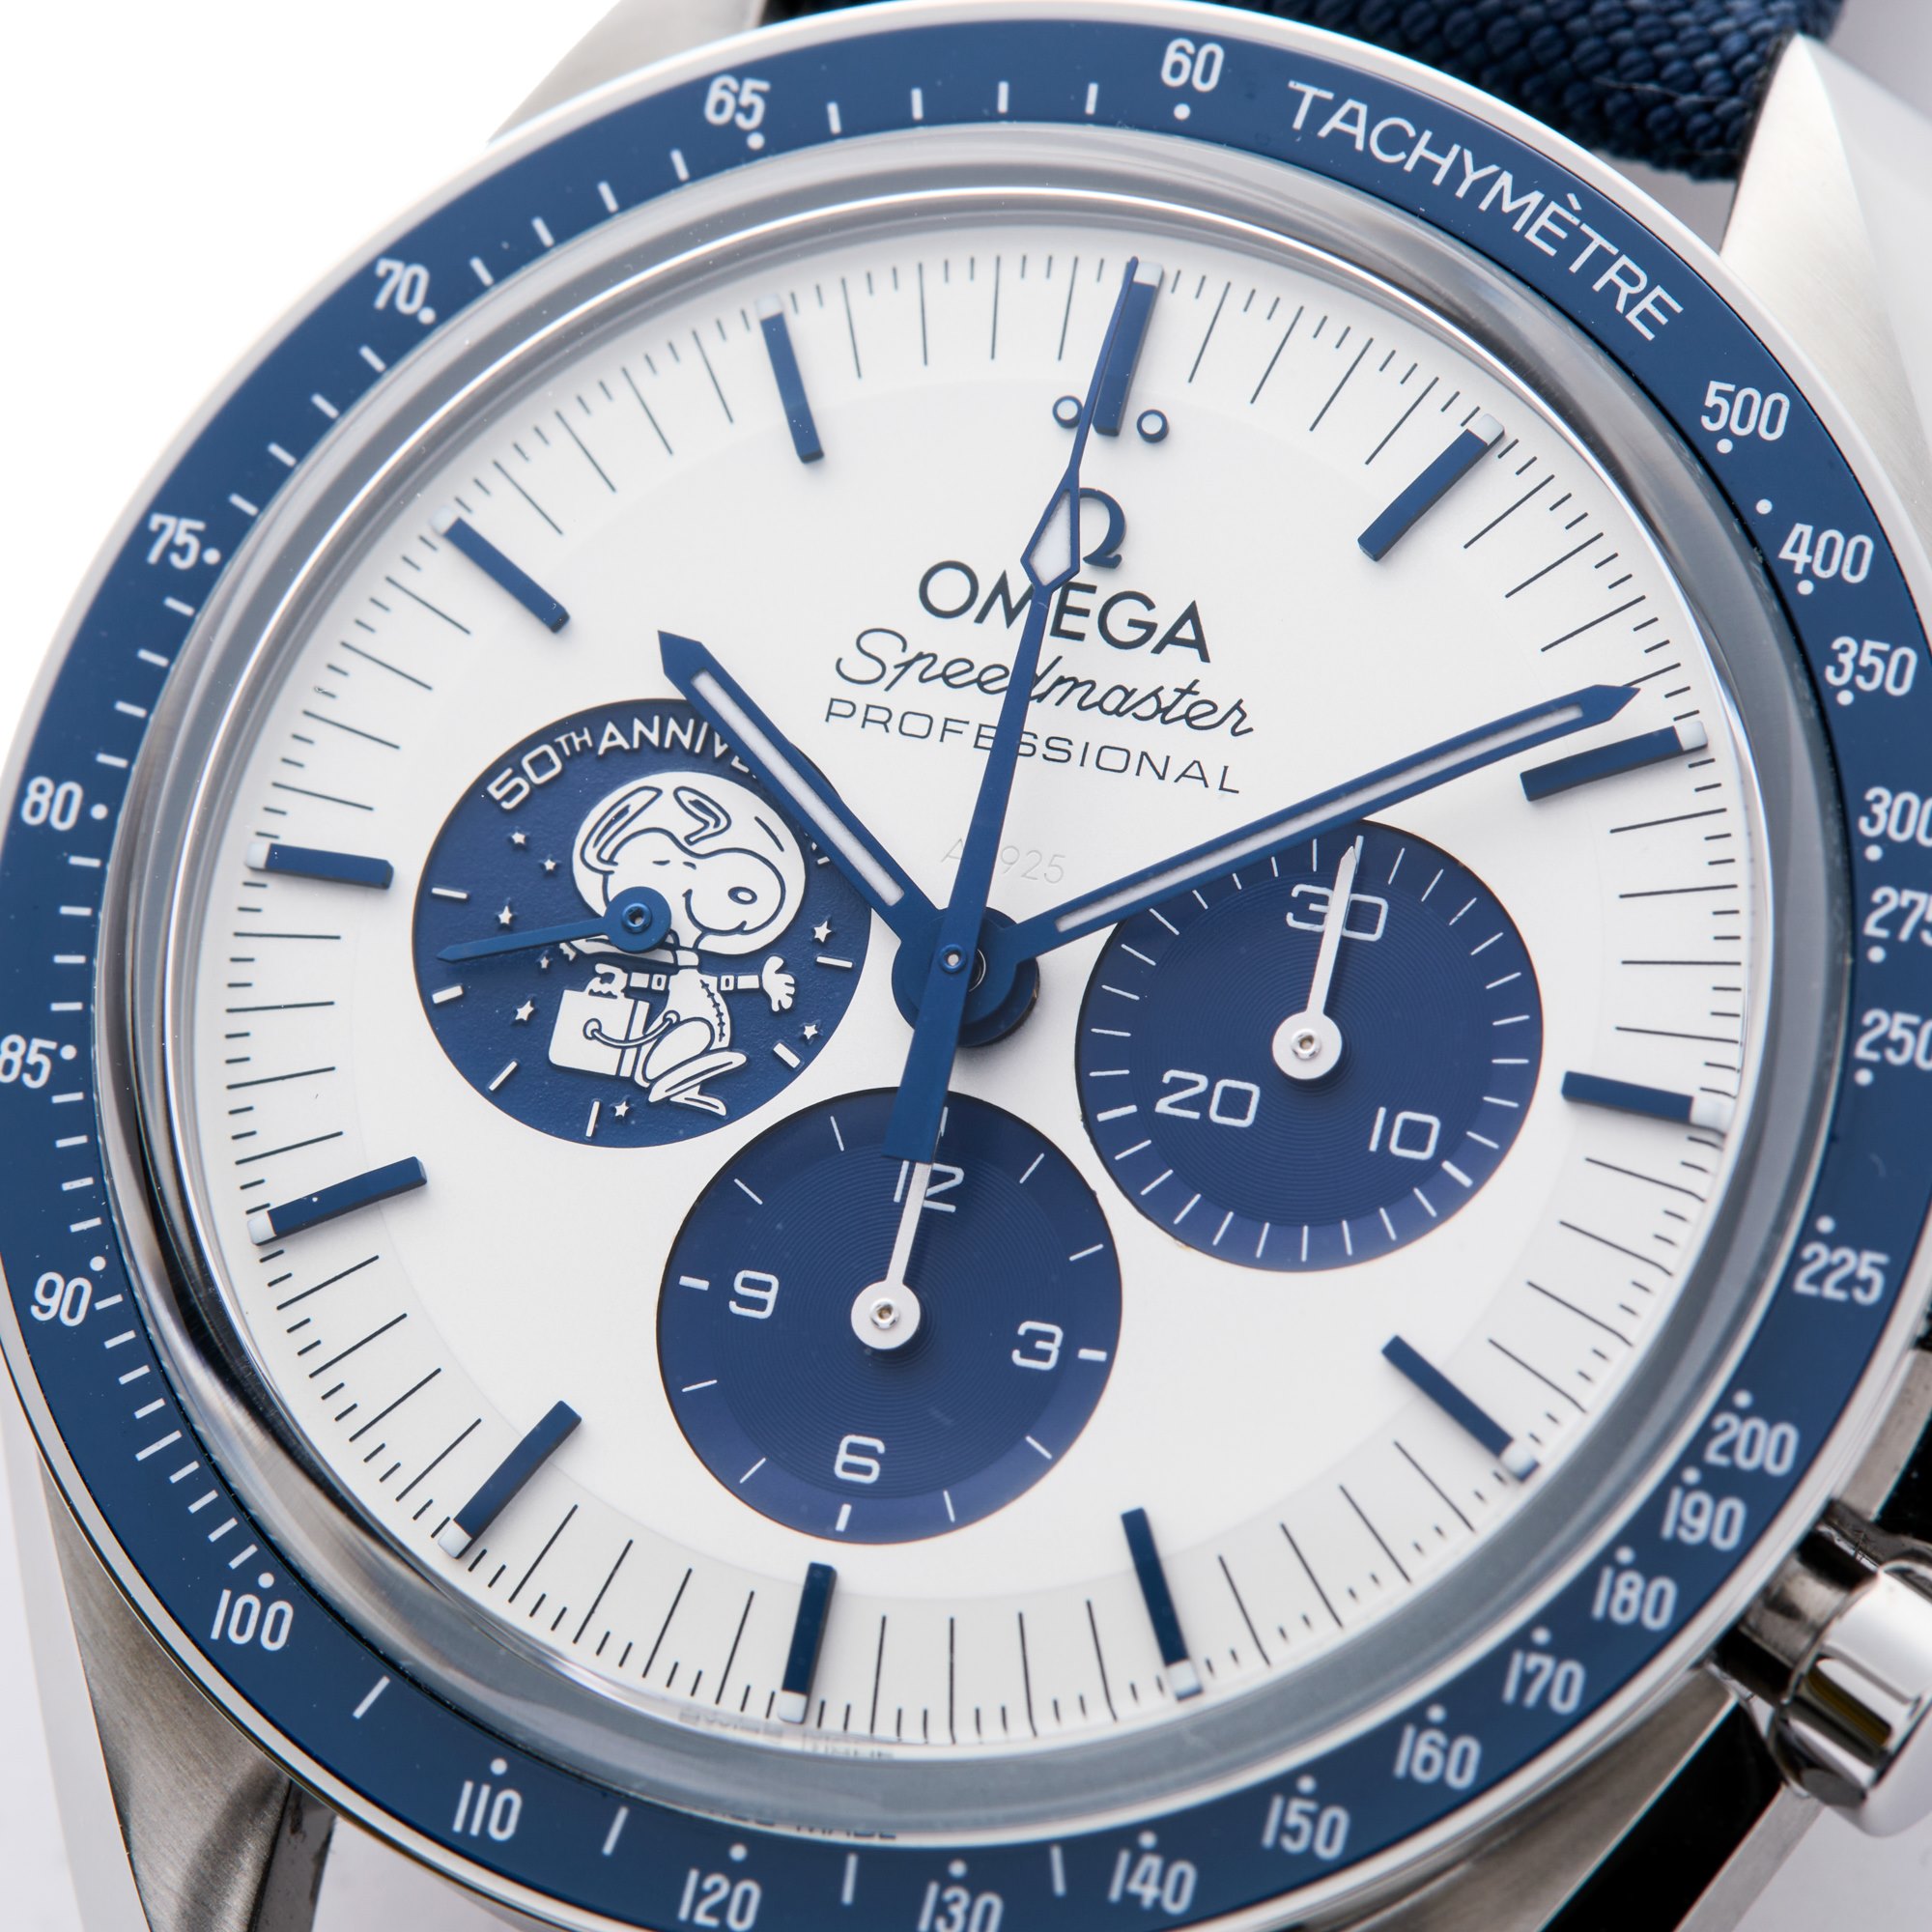 Omega Speedmaster Silver Snoopy Award Anniversary Series Roestvrij Staal 310.32.42.50.02.001